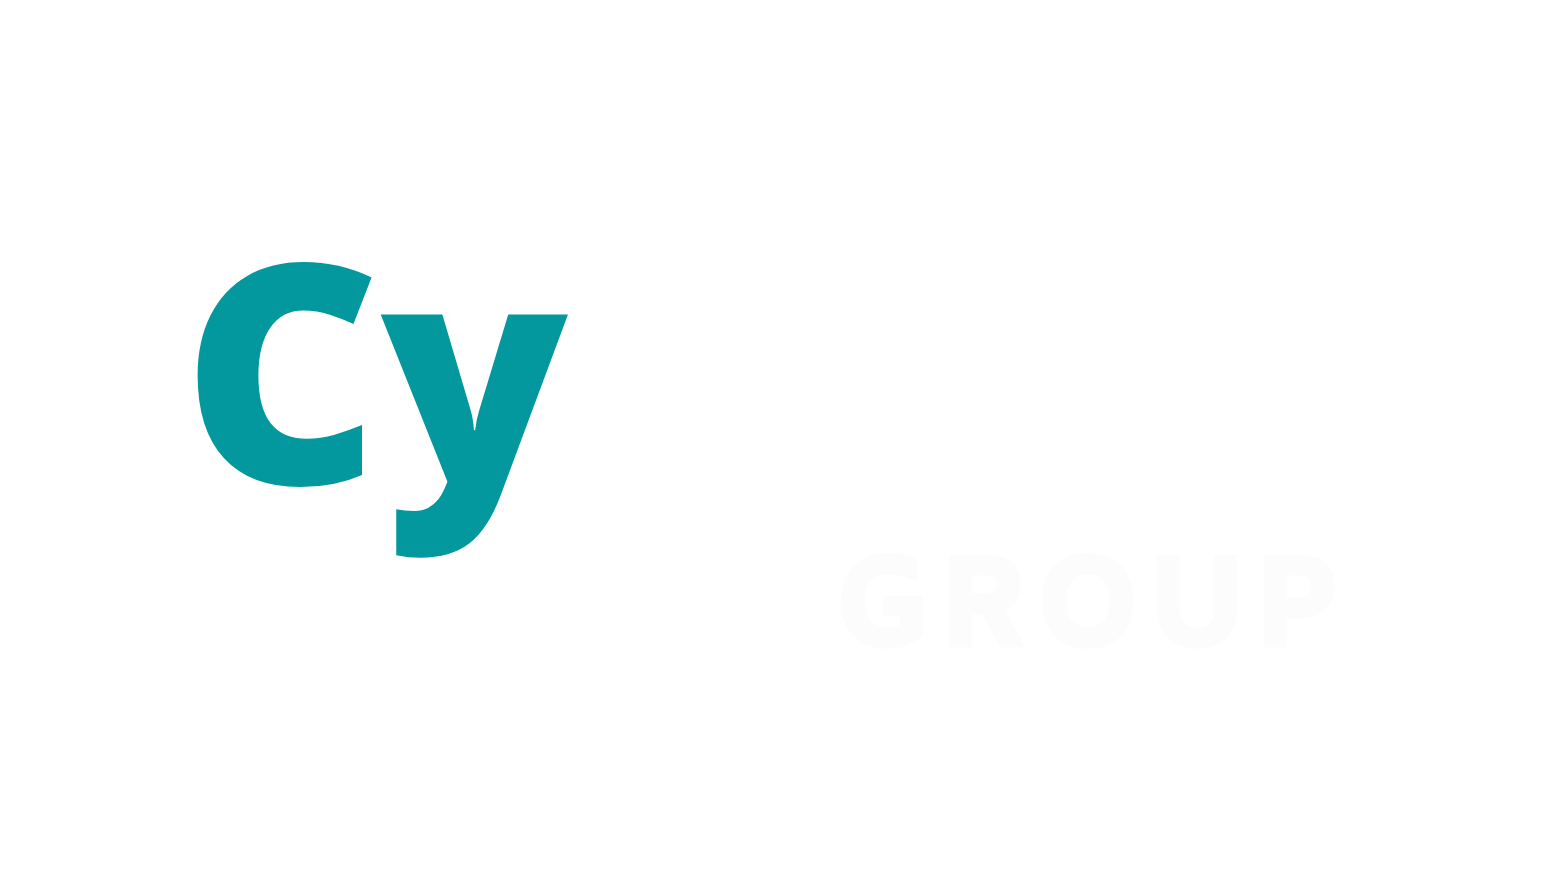 Cysuite Group